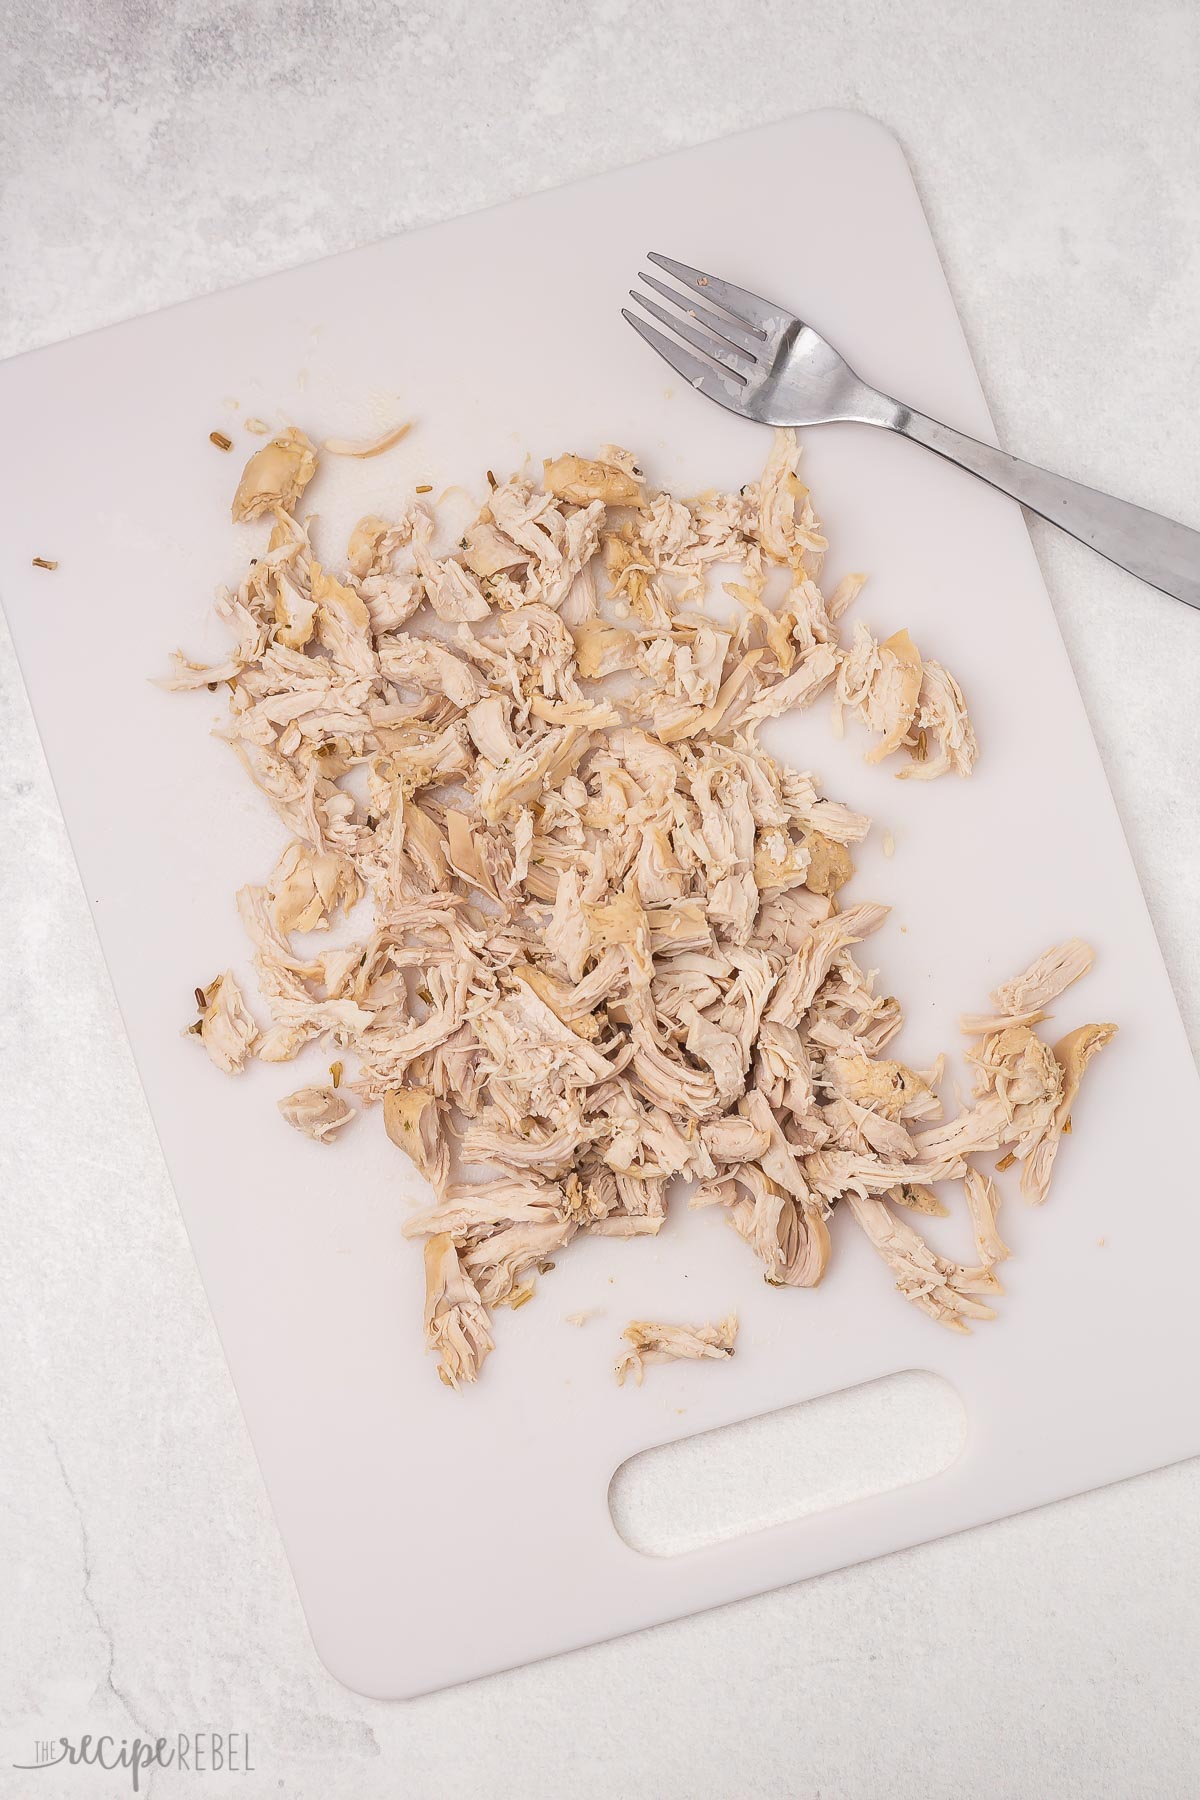 Top view of shredded chicken on a white chopping board. 